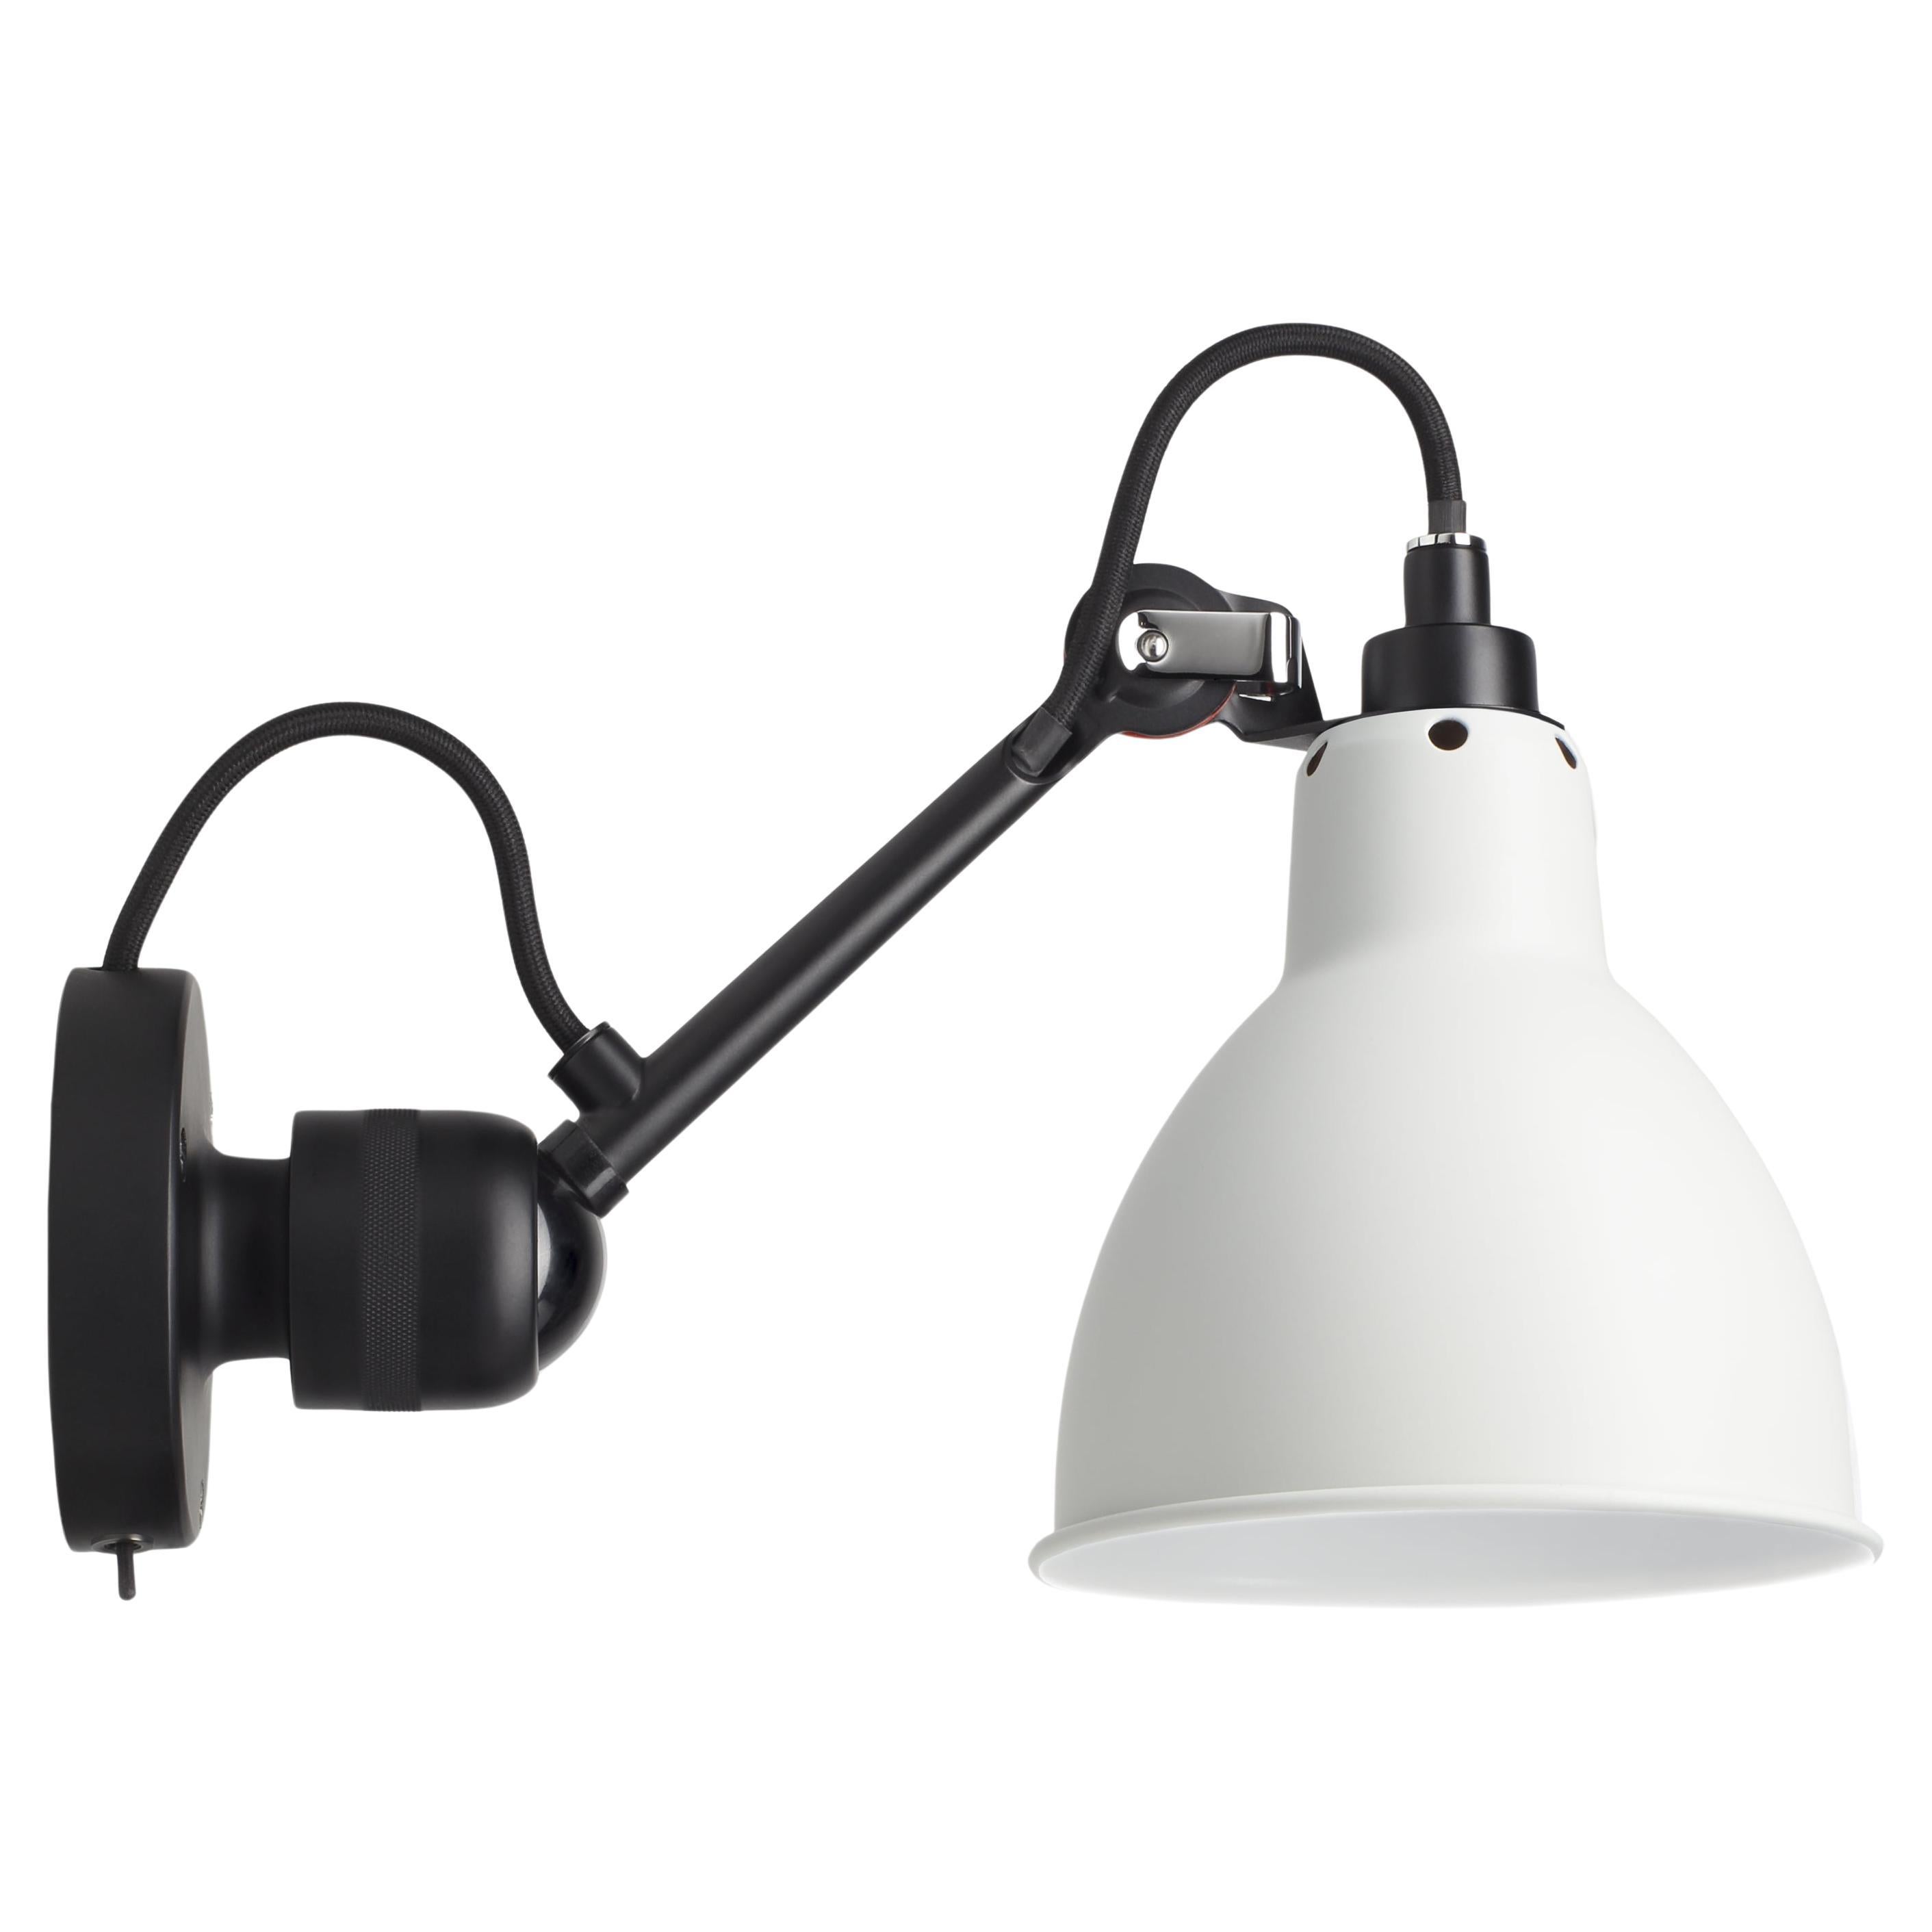 DCW Editions La Lampe Gras N°304 SW Wall Lamp in Black Arm and White Shade